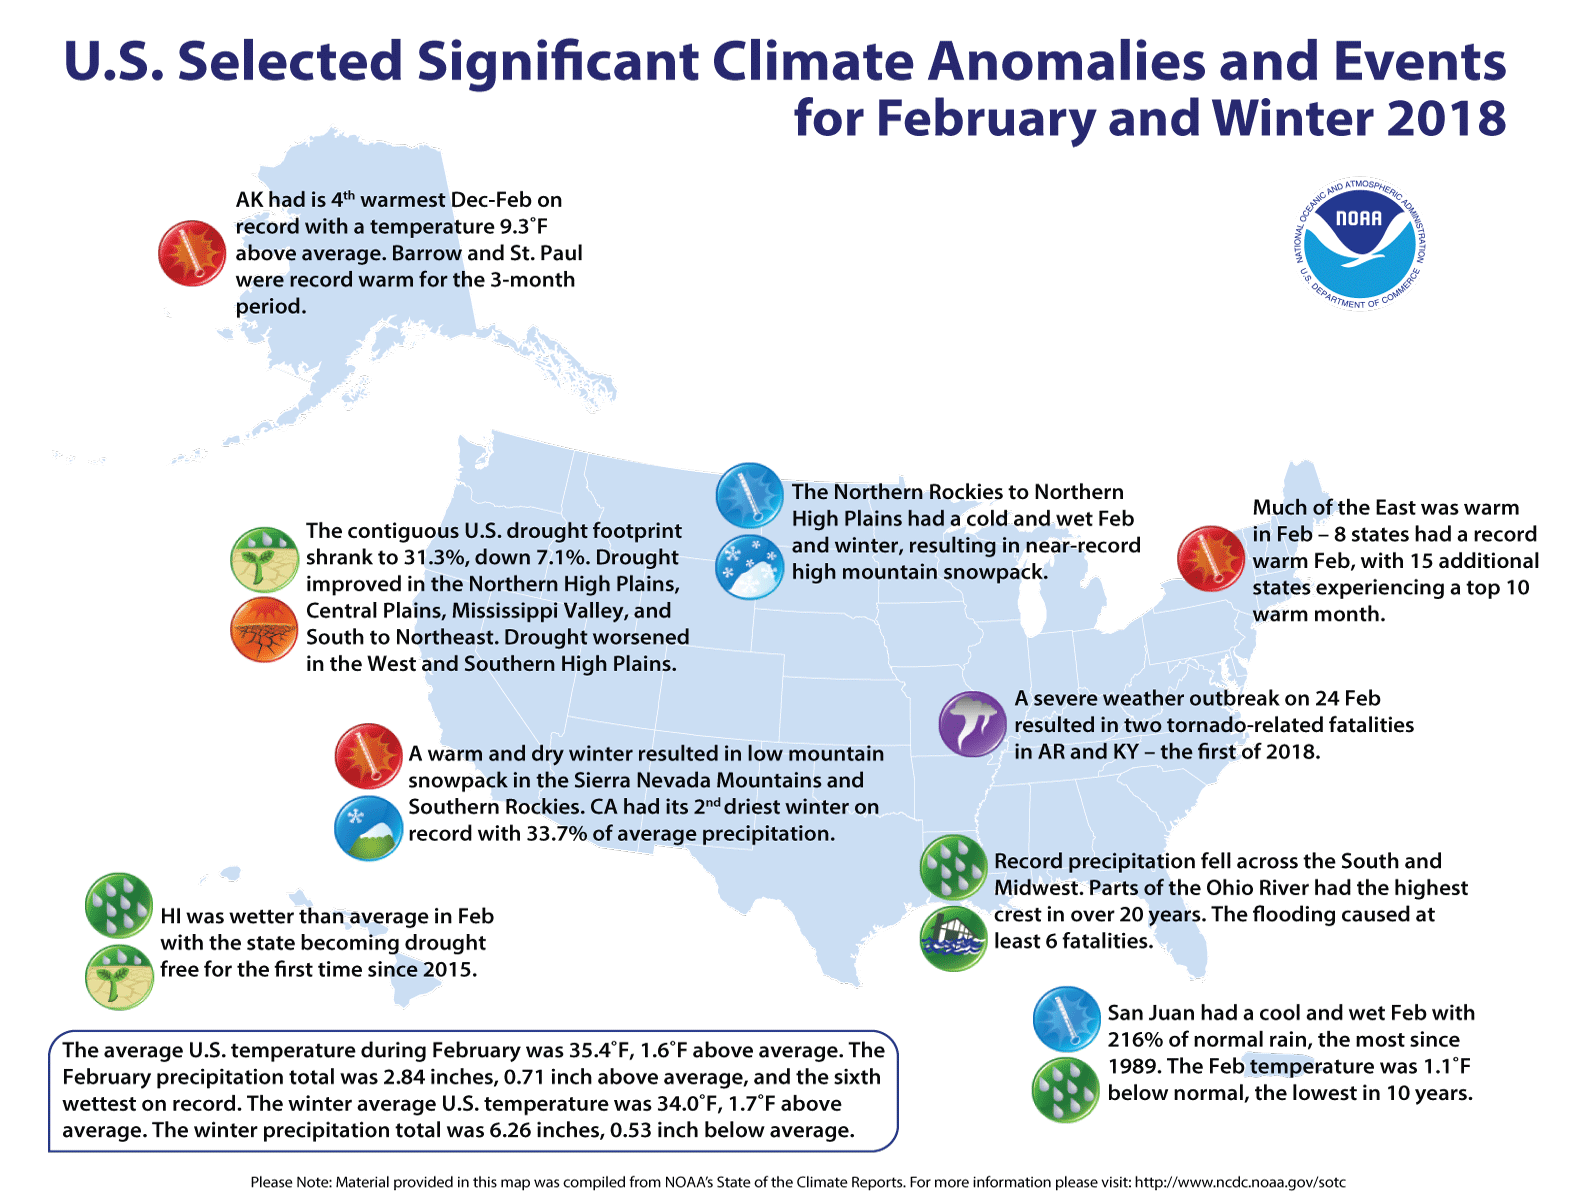 An annotated map of the United States showing other climate events that occurred in January 2018. For details, see bulleted list below in our story and also visit http://www.ncdc.noaa.gov/sotc/summary-info/national/201802.